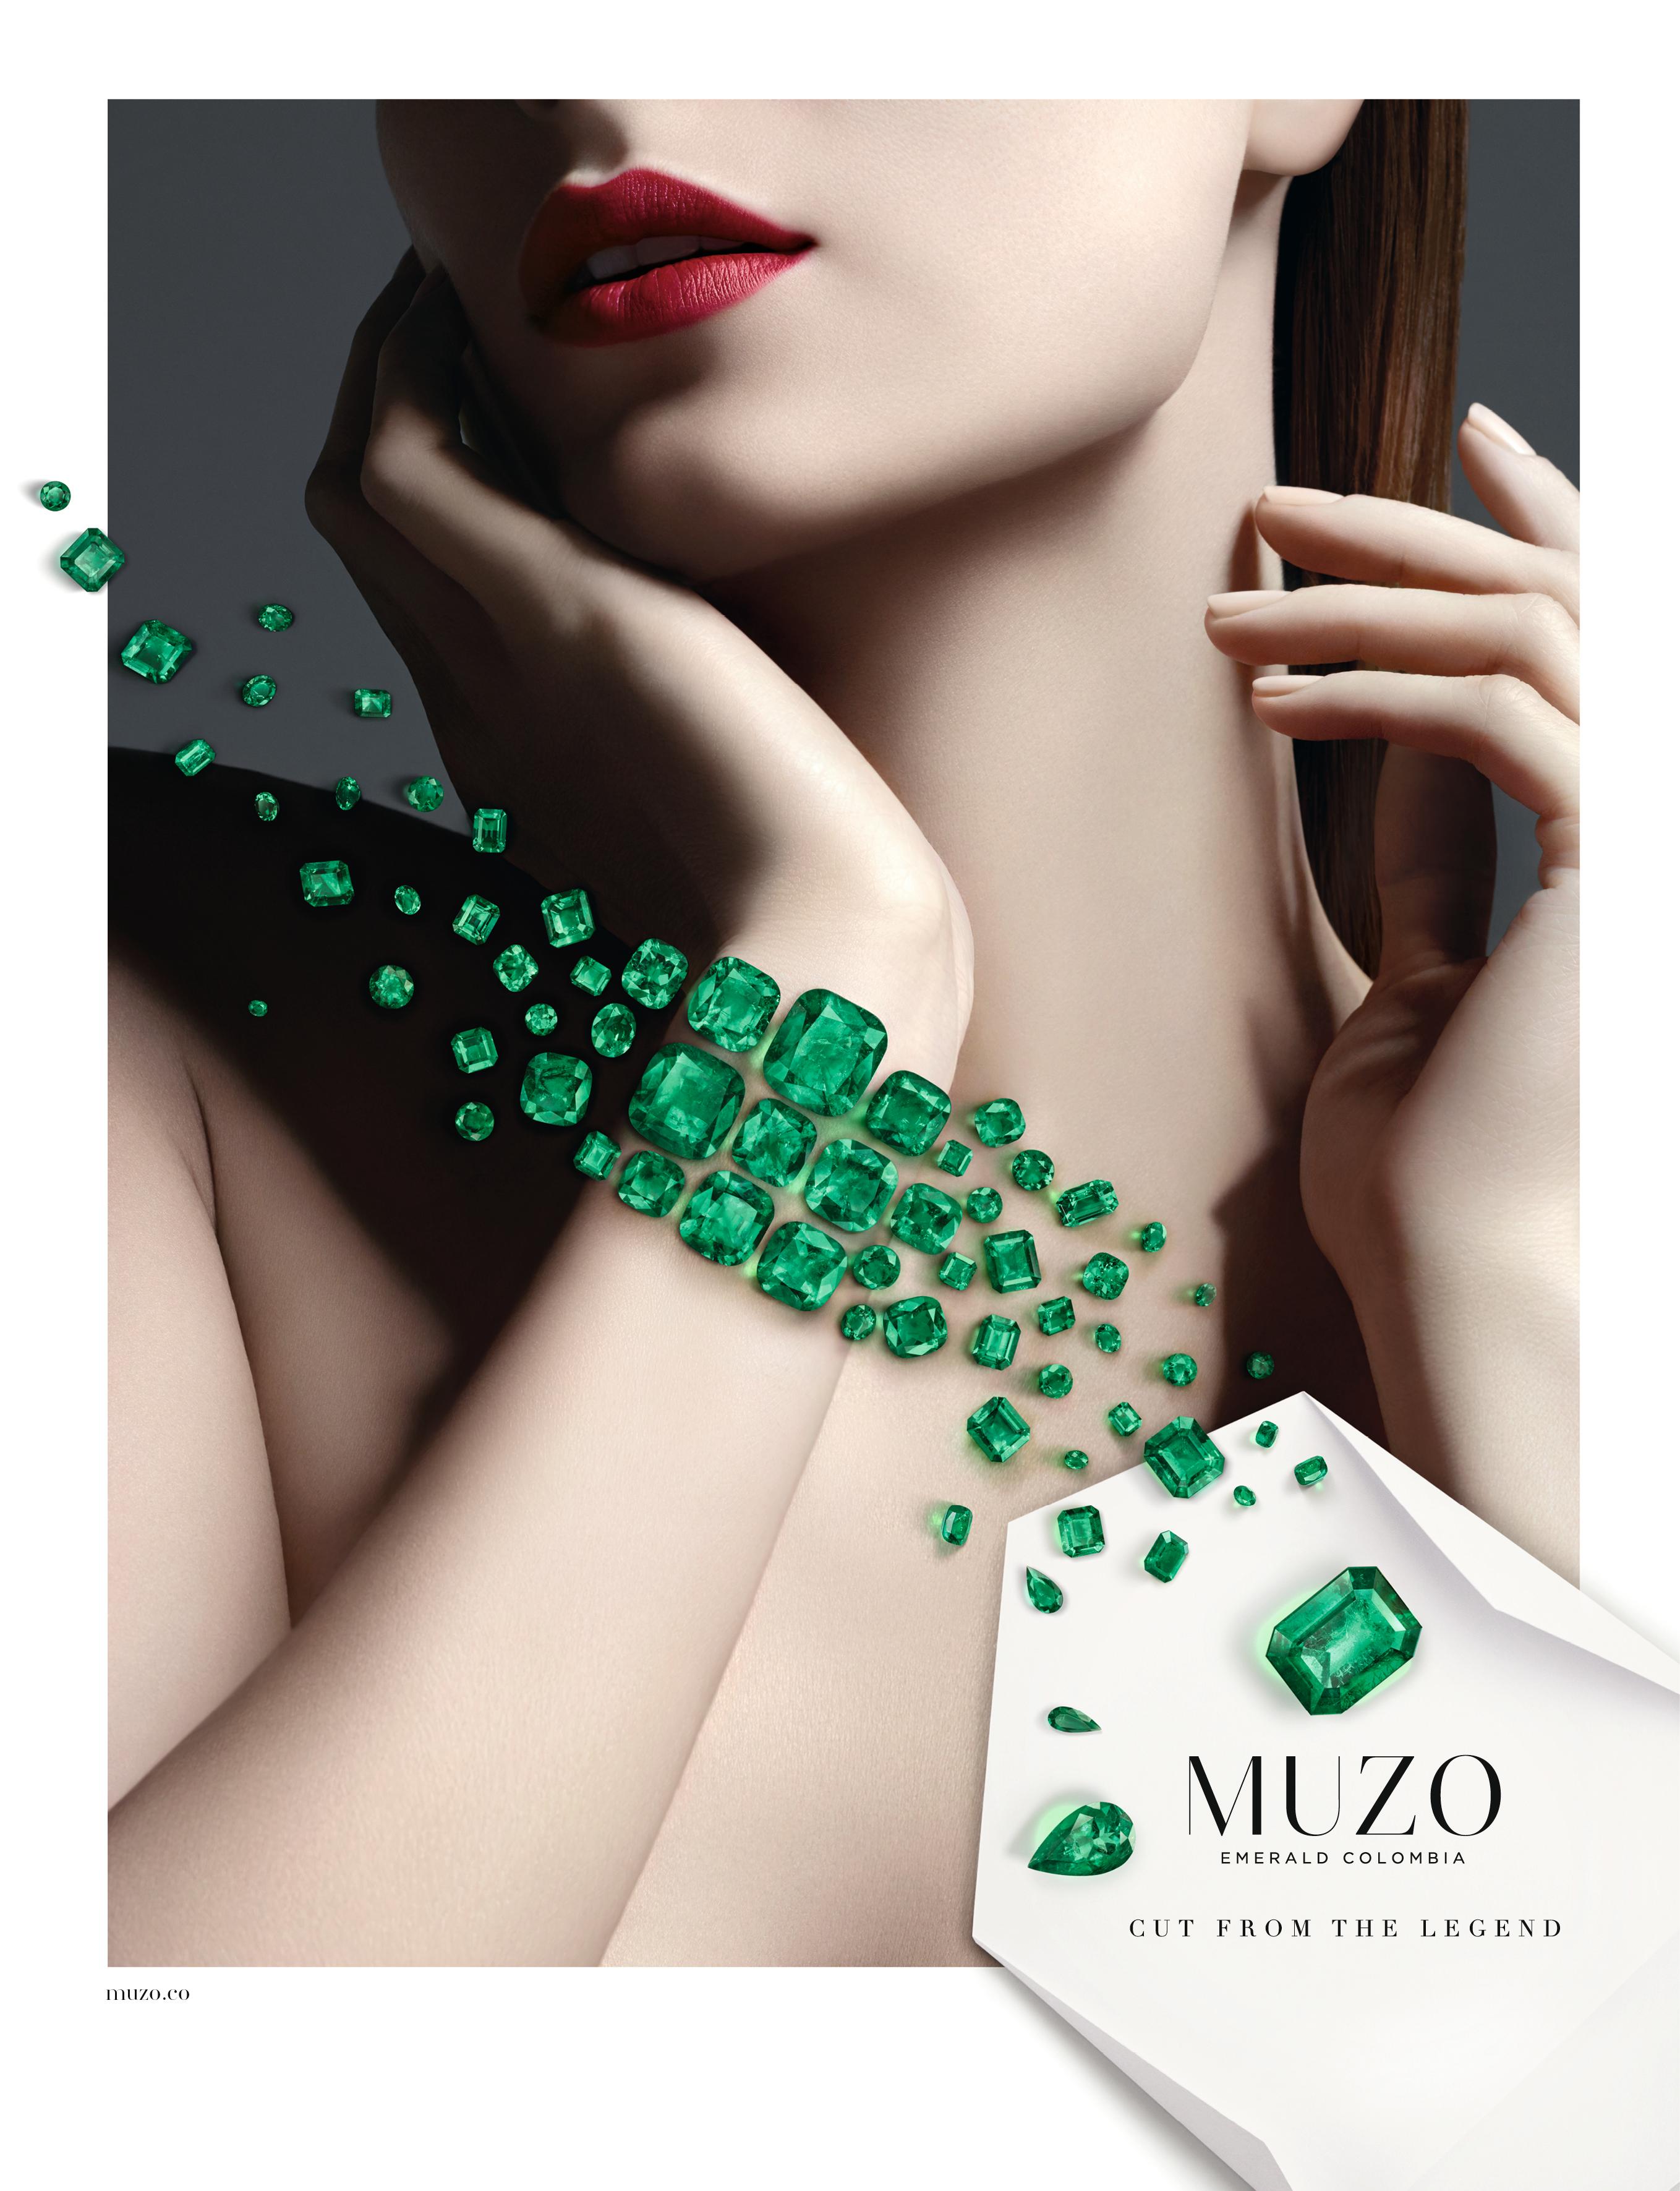 One of a kind classic 18 Karat white gold 3 row cuff featuring 166.90 carats of Muzo Colombian emeralds with scattered round diamonds weighing 2.50 carats.

Muzo Emerald Colombia Heritage Muisca Bracelet set with 166.90 carats Emerald.

Named in